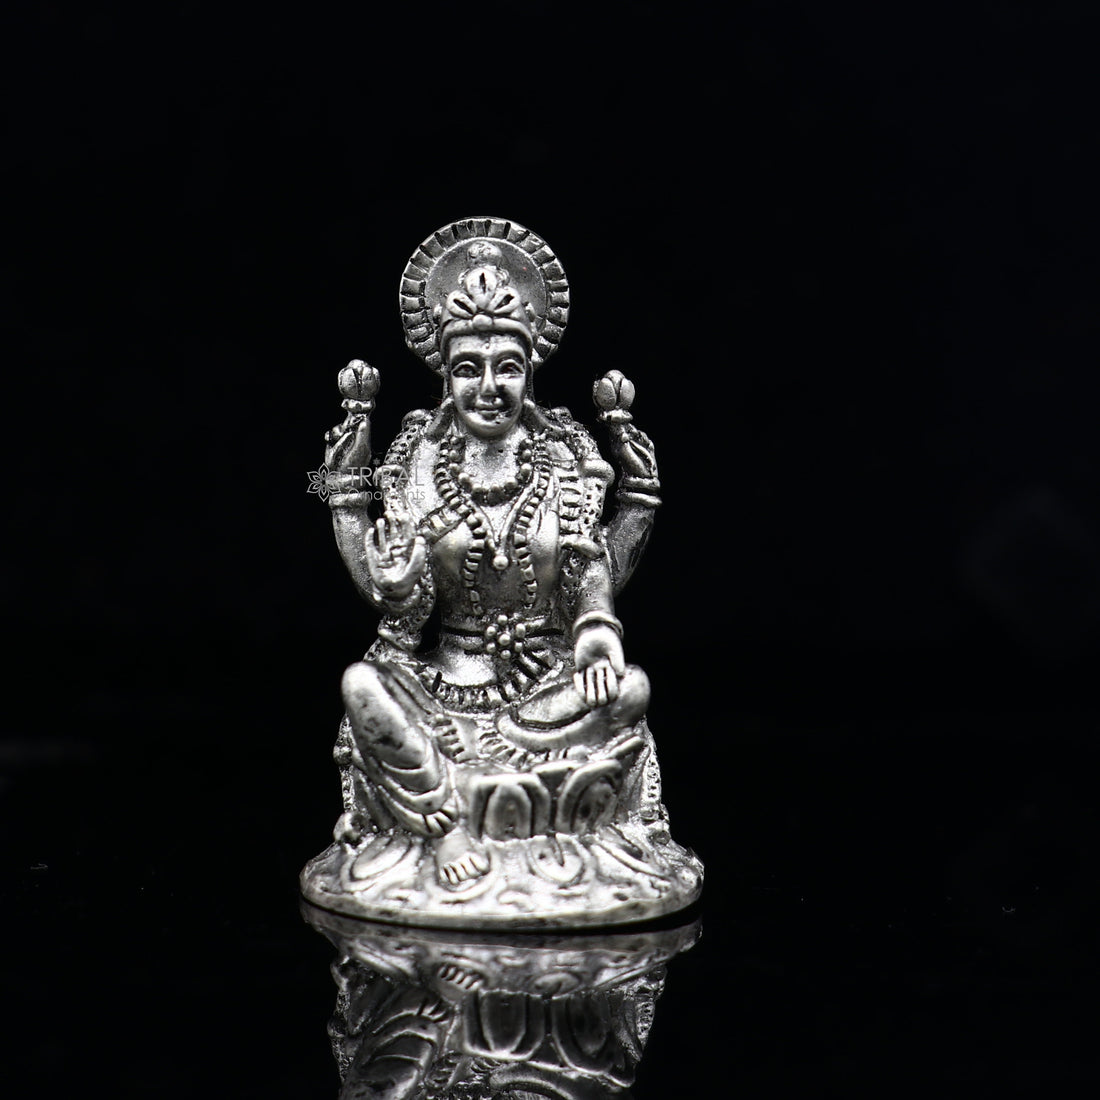 925 Silver Goddess Lakshmi Divine statue figurine for puja,best way for Diwali festival puja or worshipping for wealth and prosperity art752 - TRIBAL ORNAMENTS